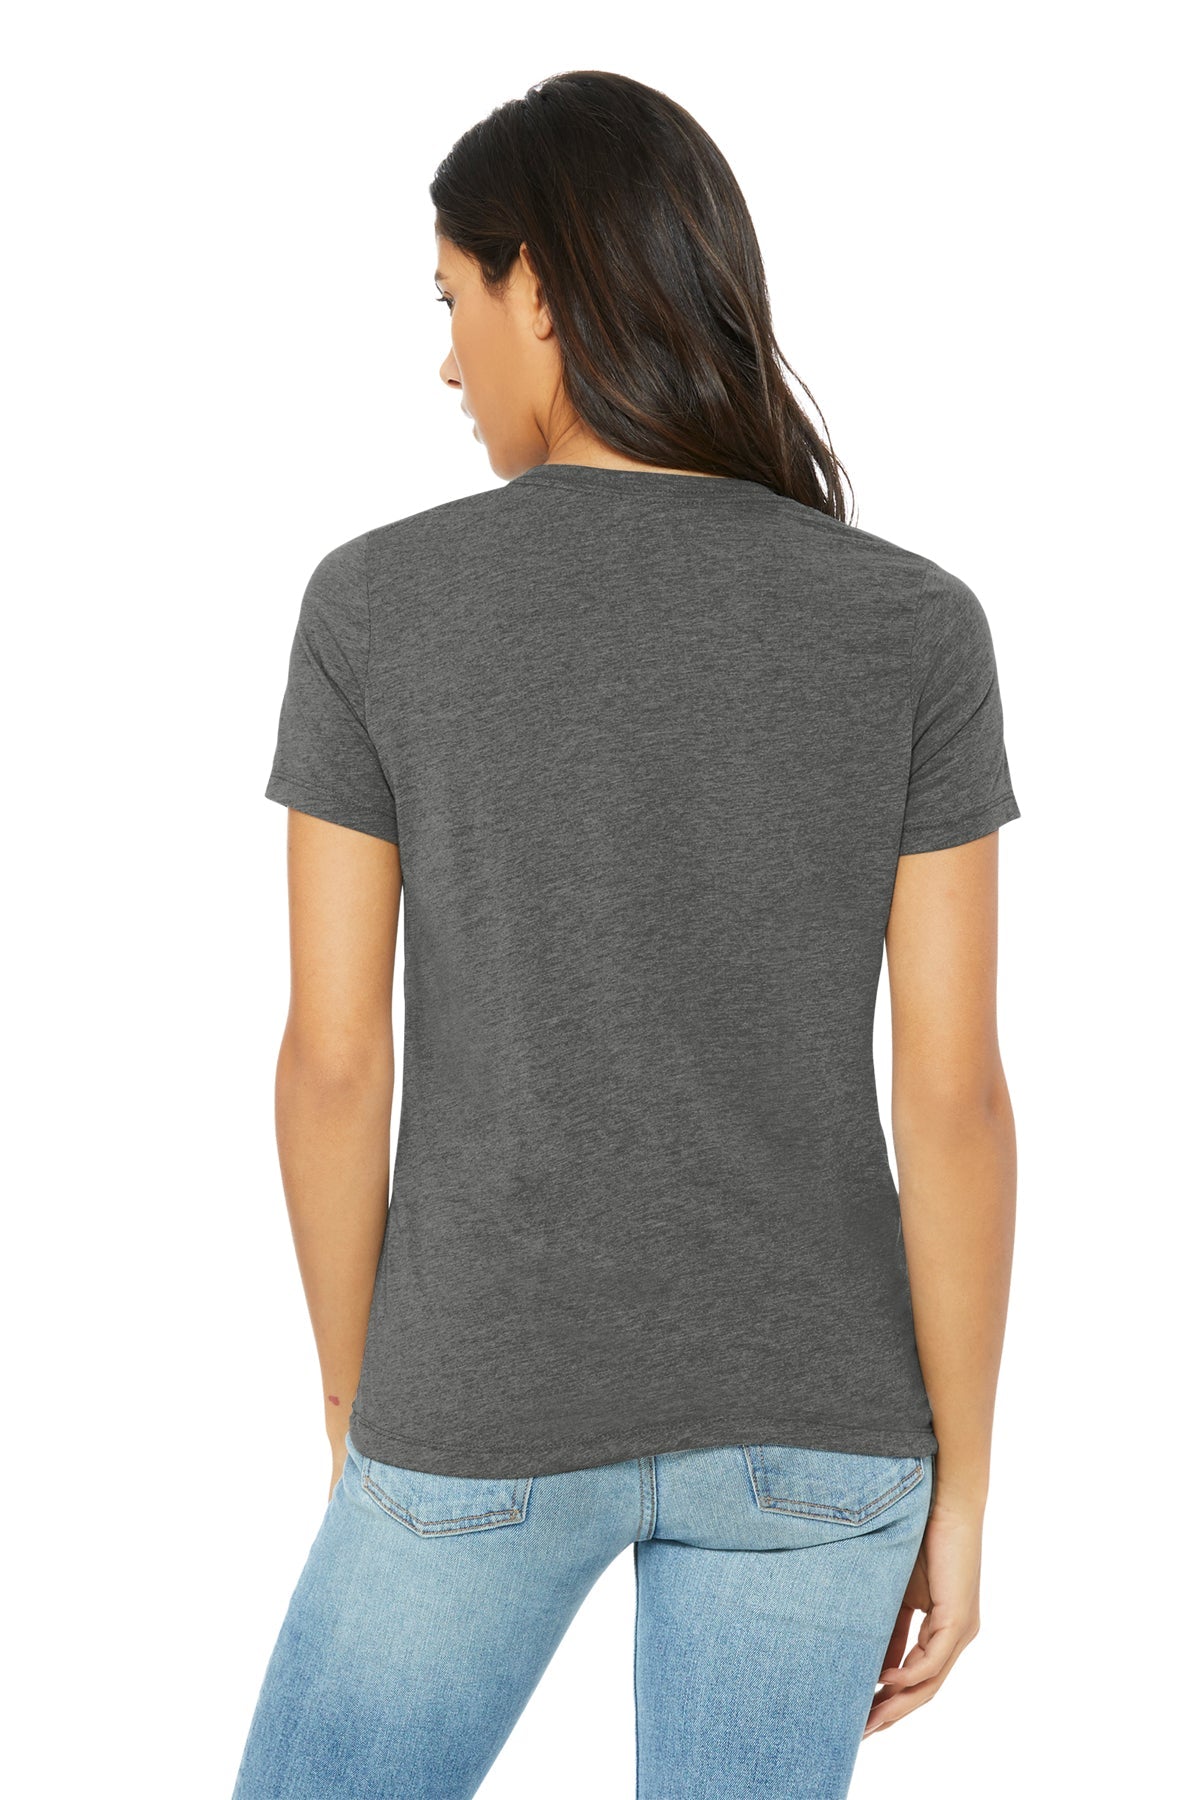 Bella Canvas Womens Relaxed Triblend T-Shirt, Grey